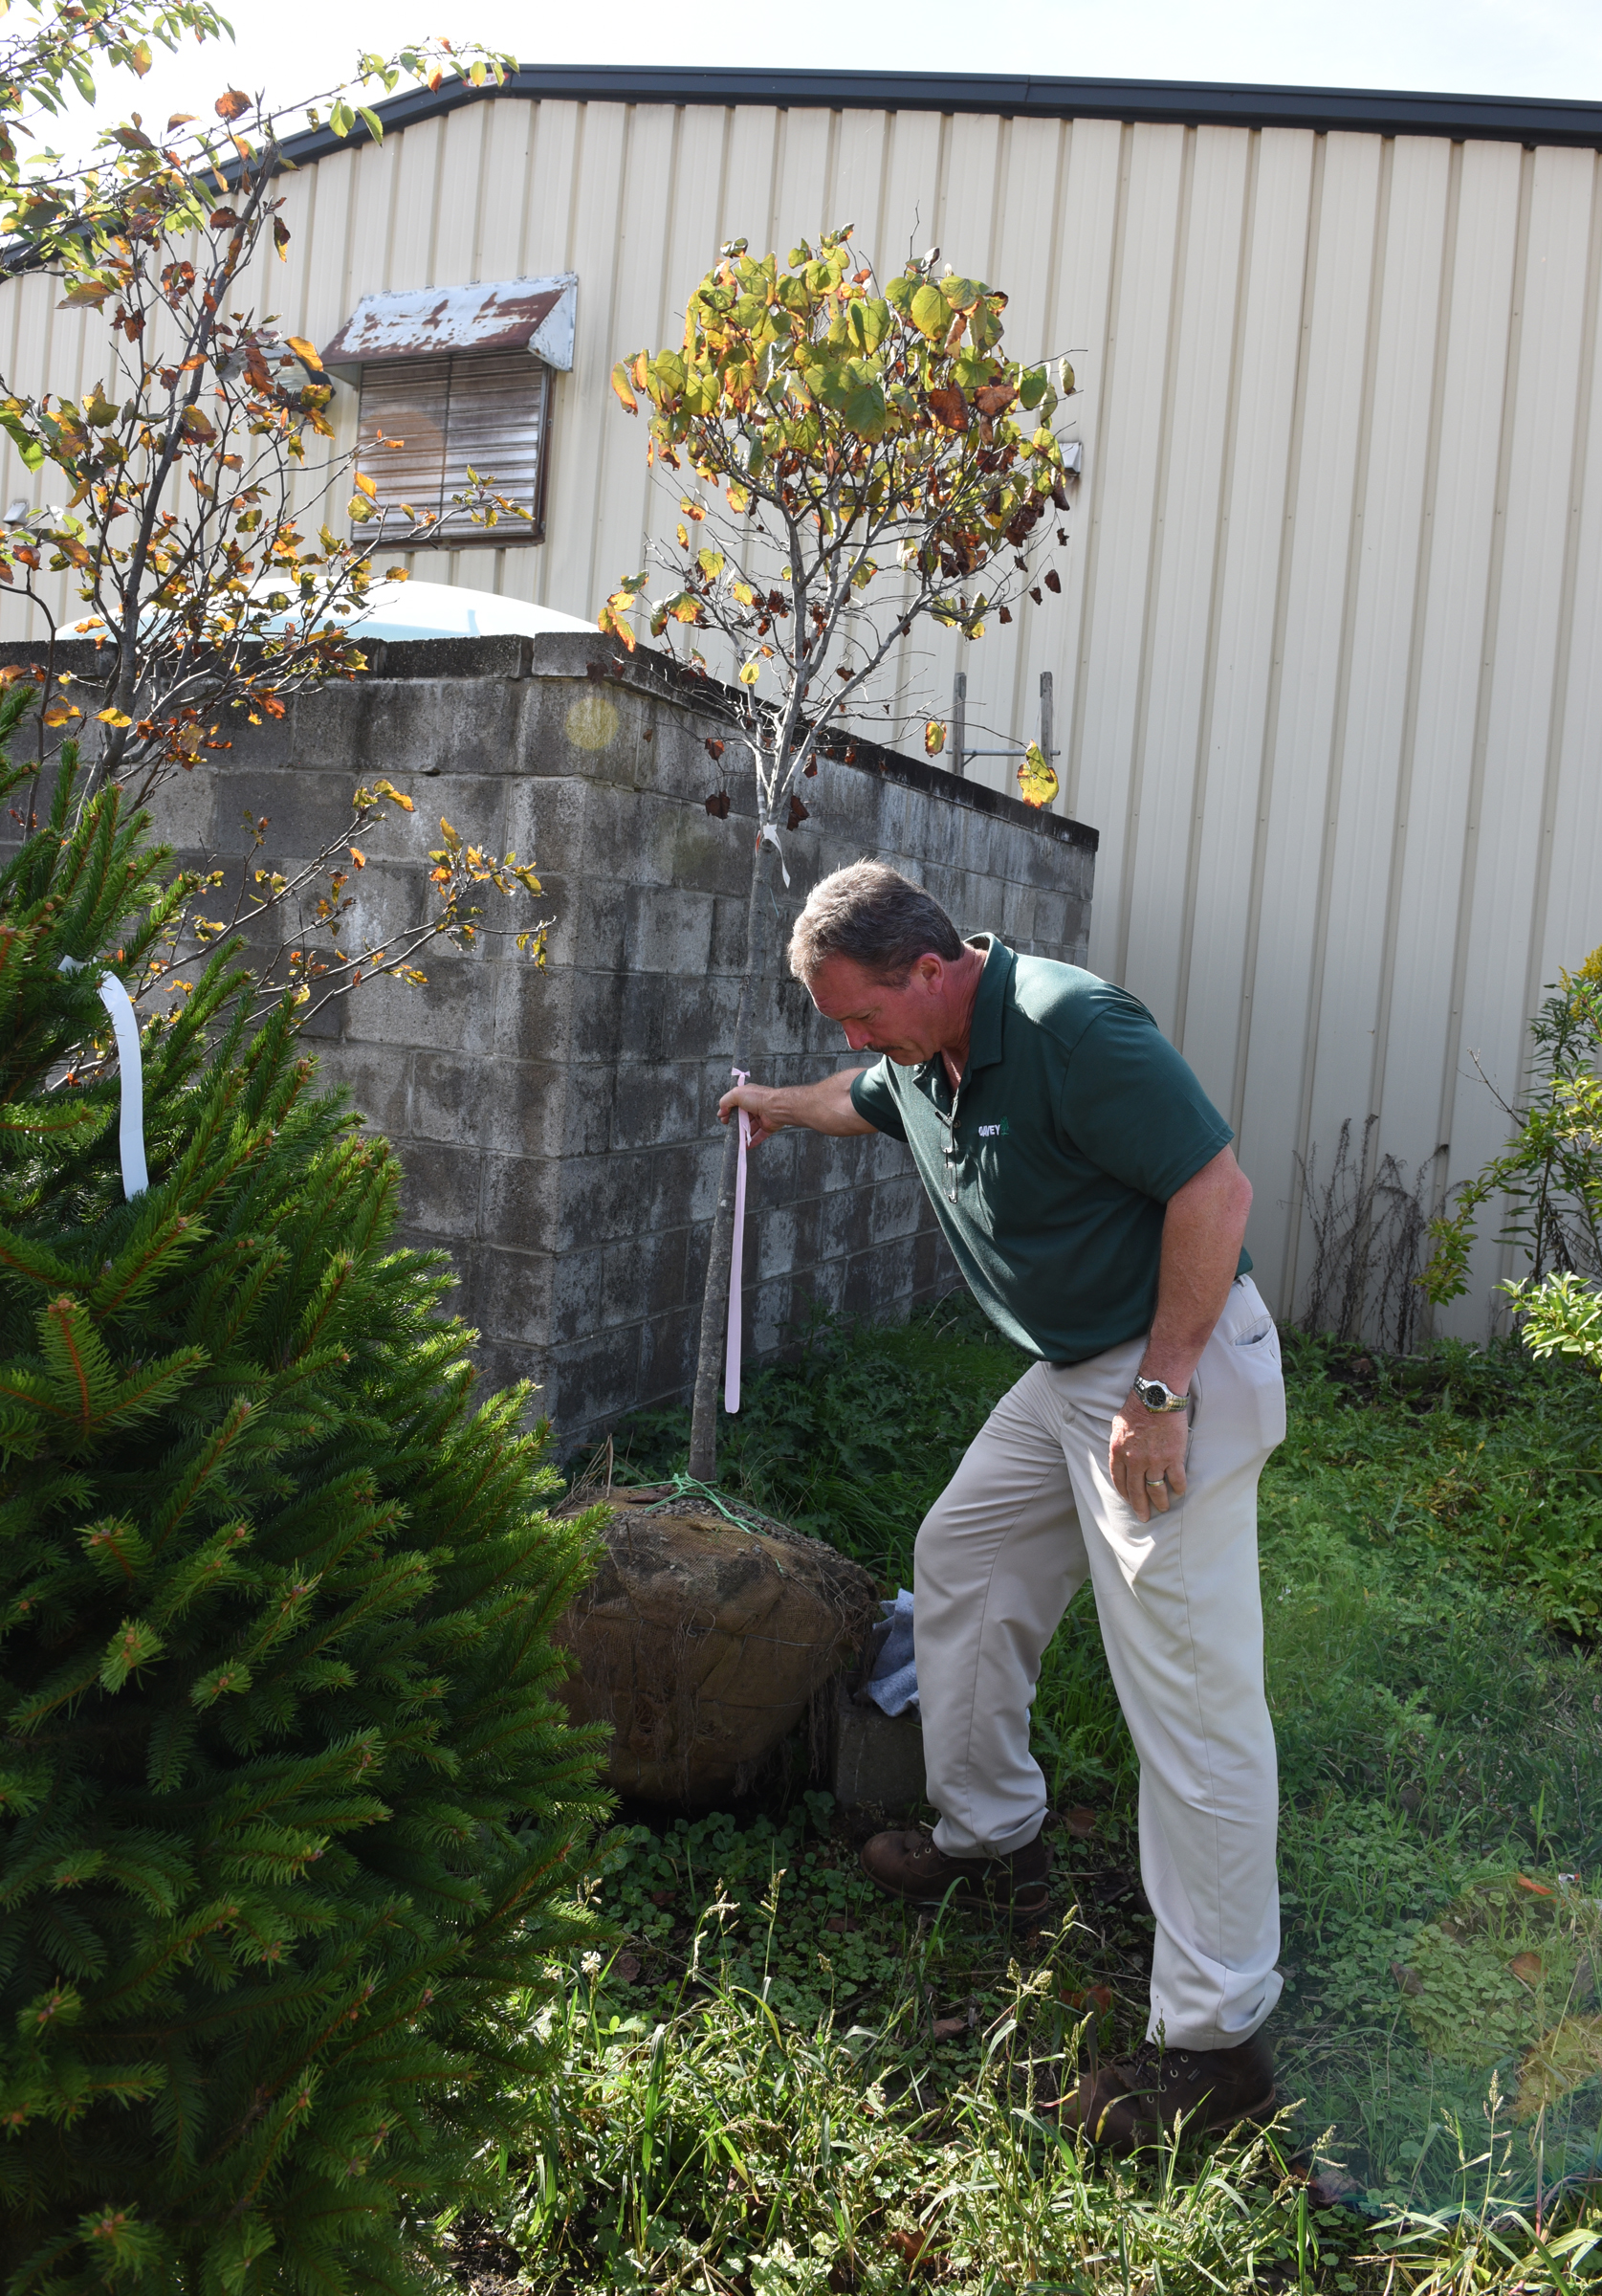 Dick Till is assistant district manager South Pittsburgh for the Davey Tree Expert Company. The ISA certified arborist looks over the root ball of a tree ready to be planted.